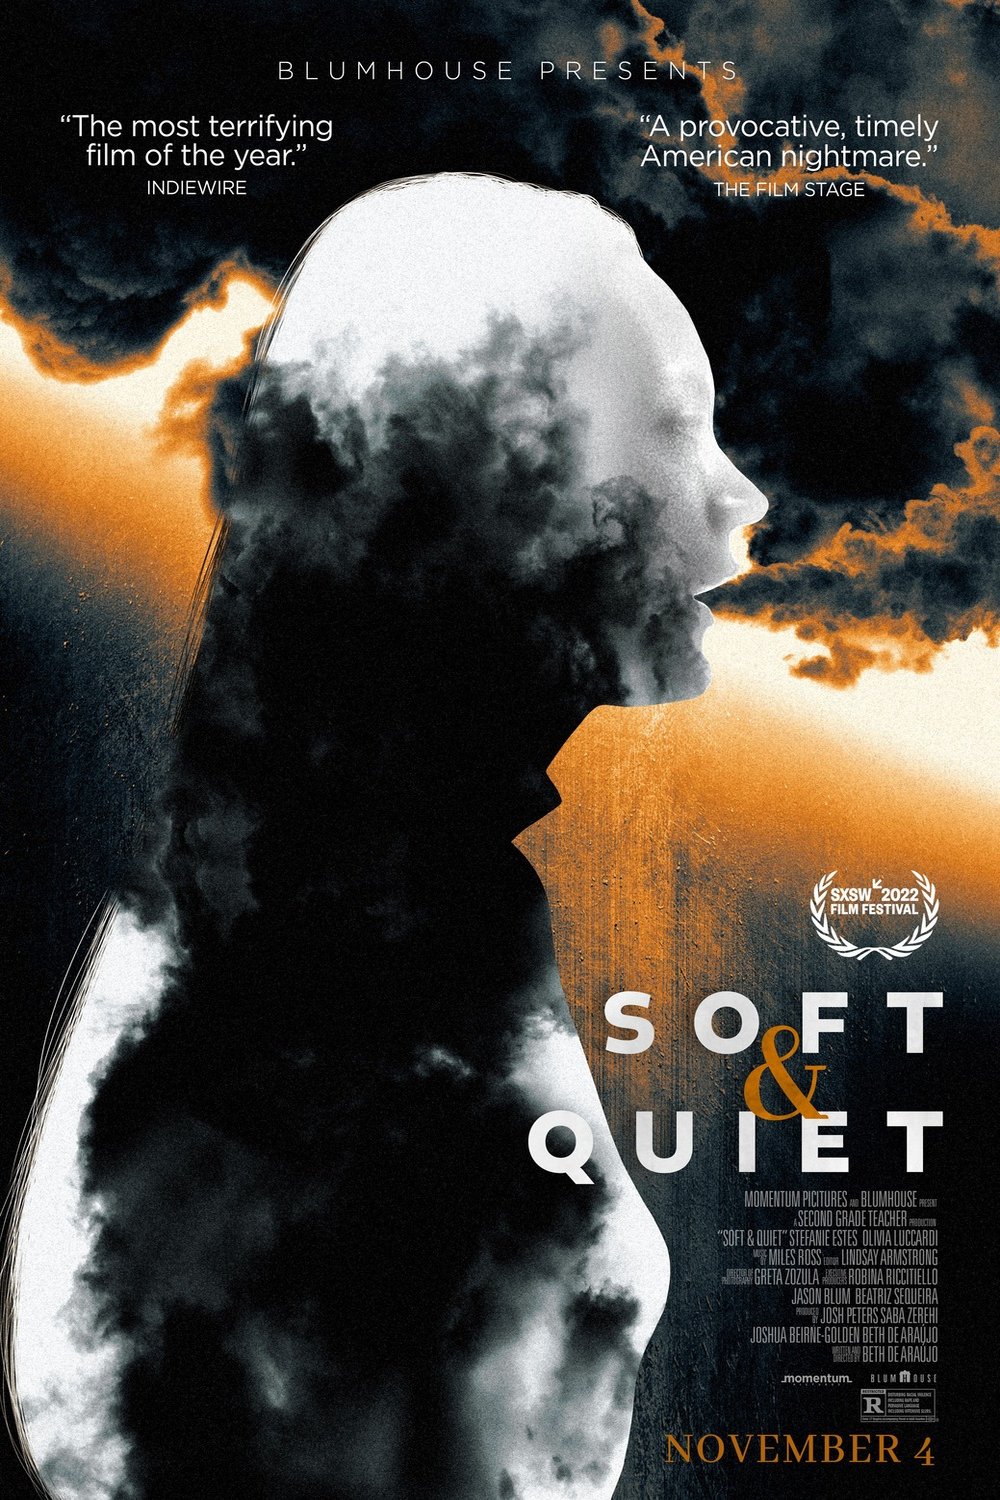 Poster of the movie Soft & Quiet